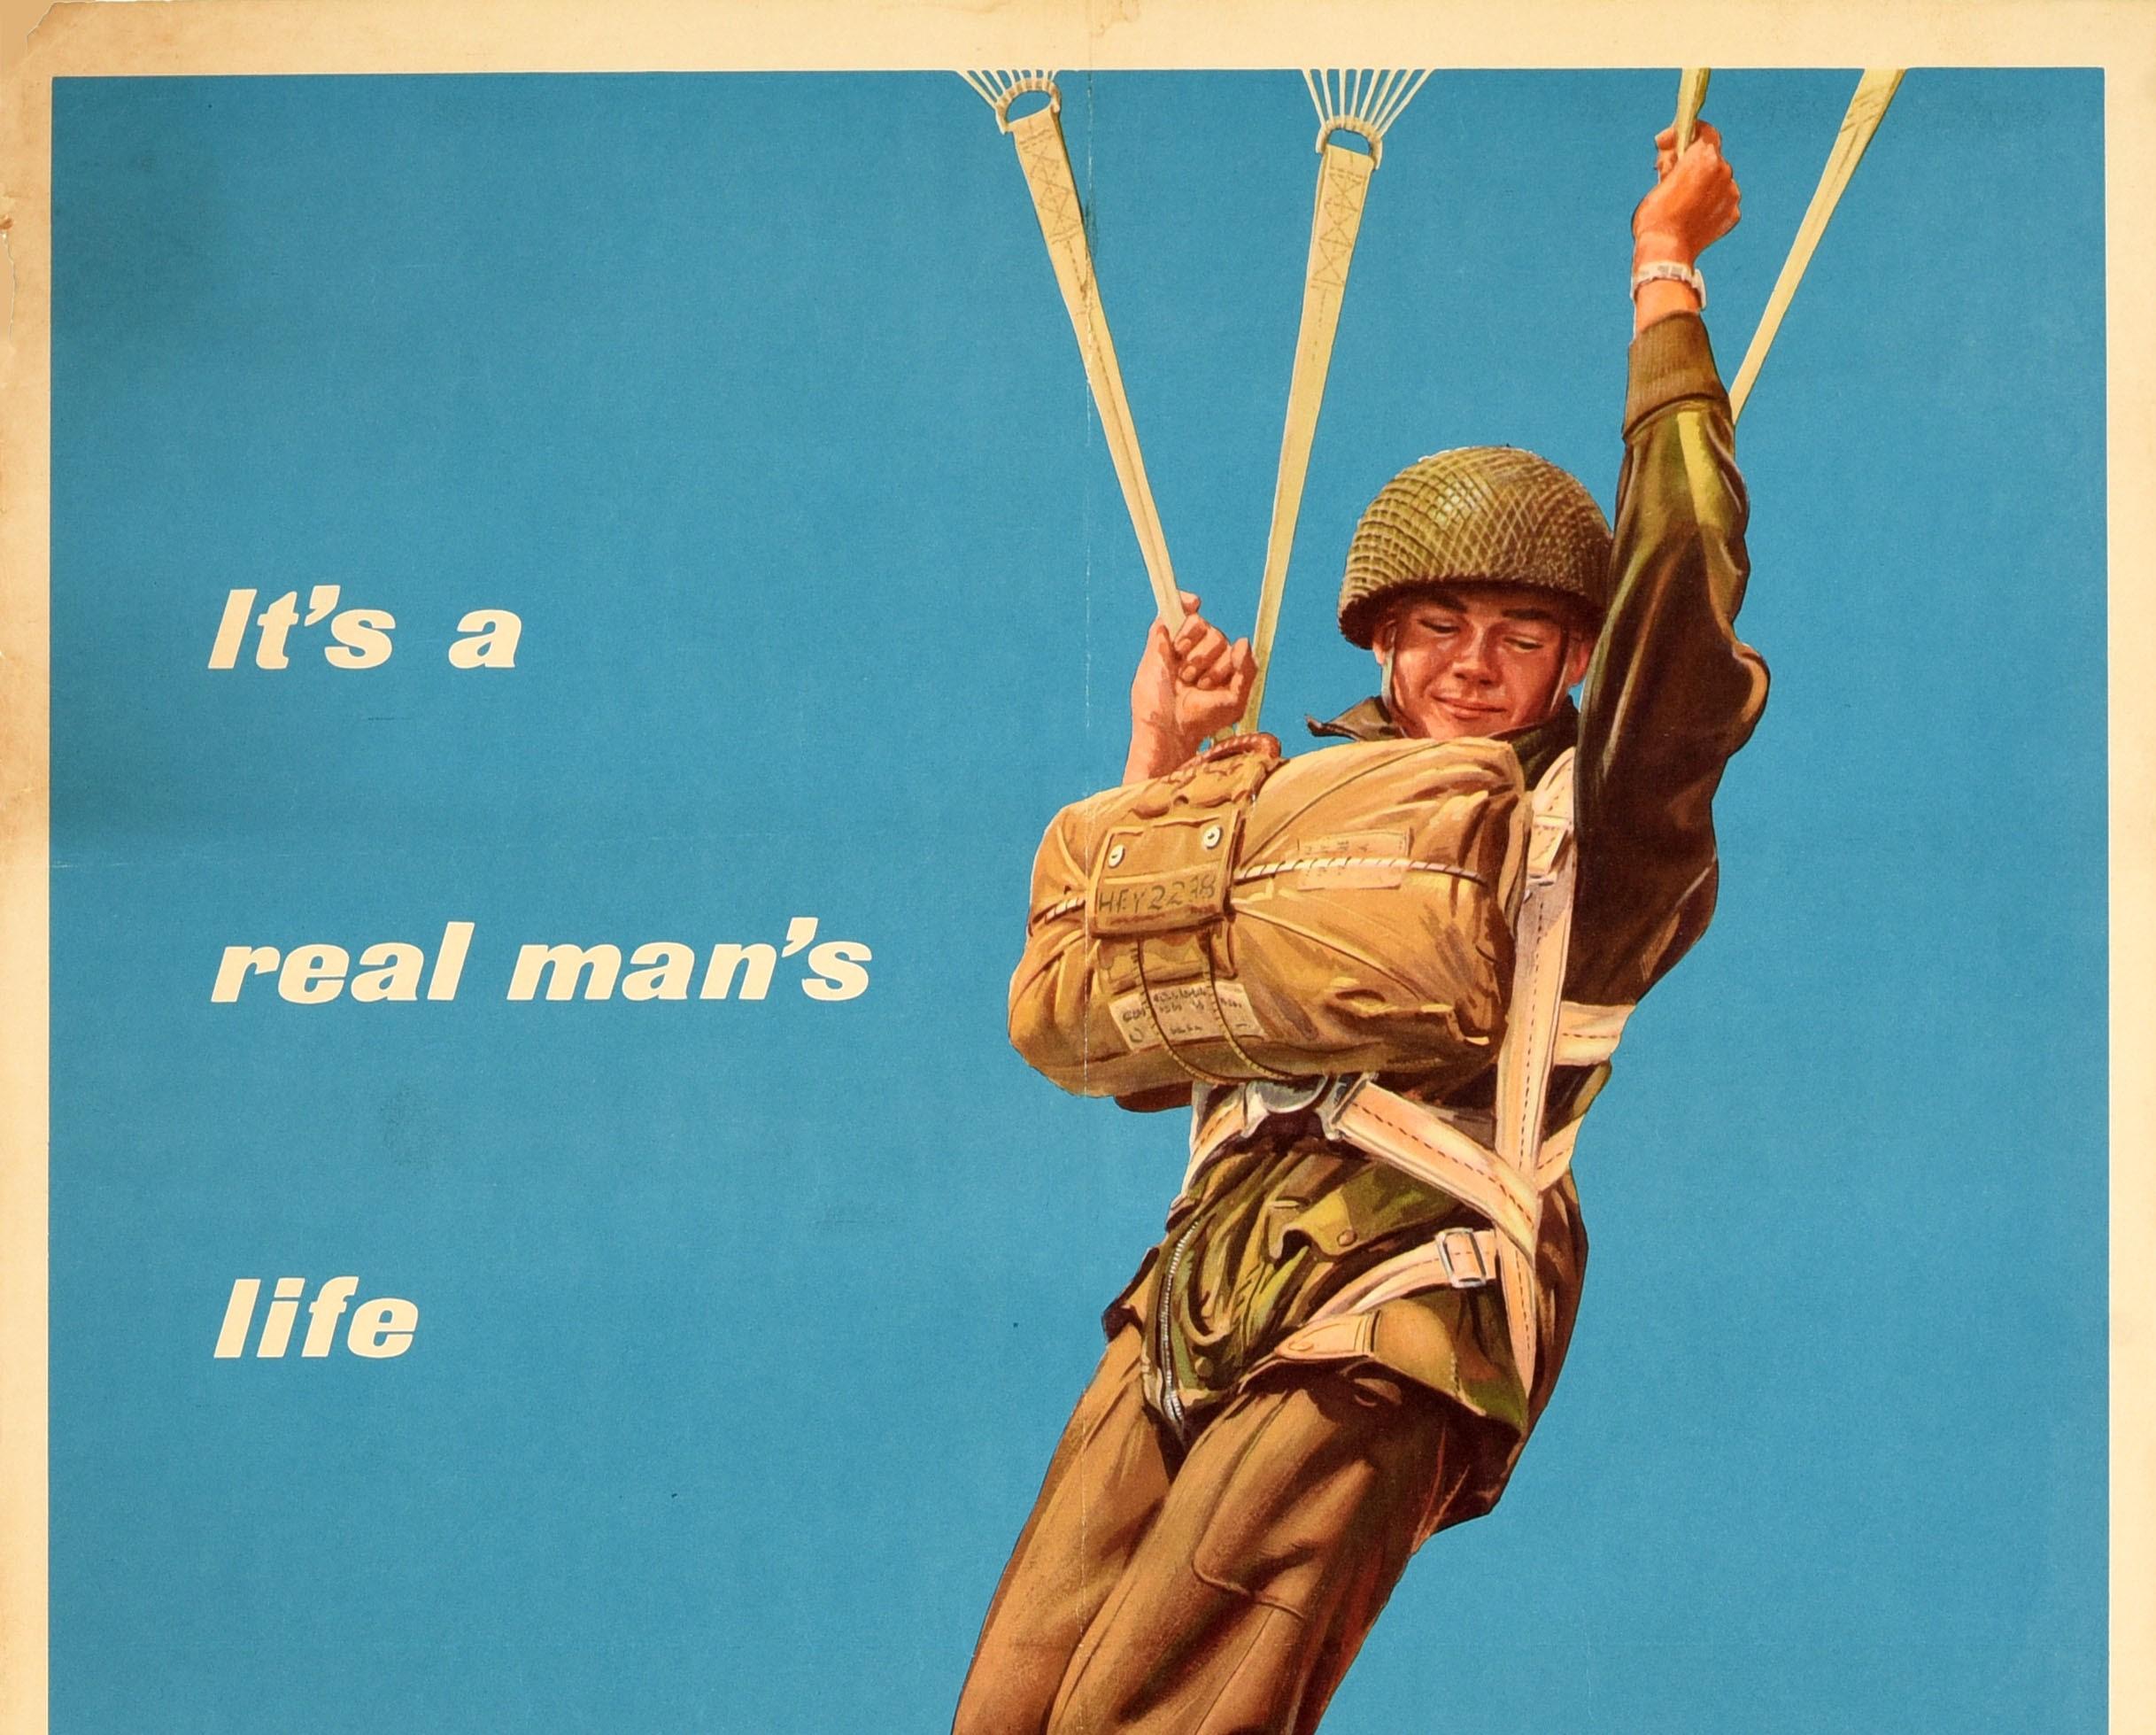 Original vintage British Army recruitment poster - Join the Regular Army - featuring a soldier in military uniform dropping through the sky with a parachute against a blue background next to the slogan in white letters: It’s a real man's life.